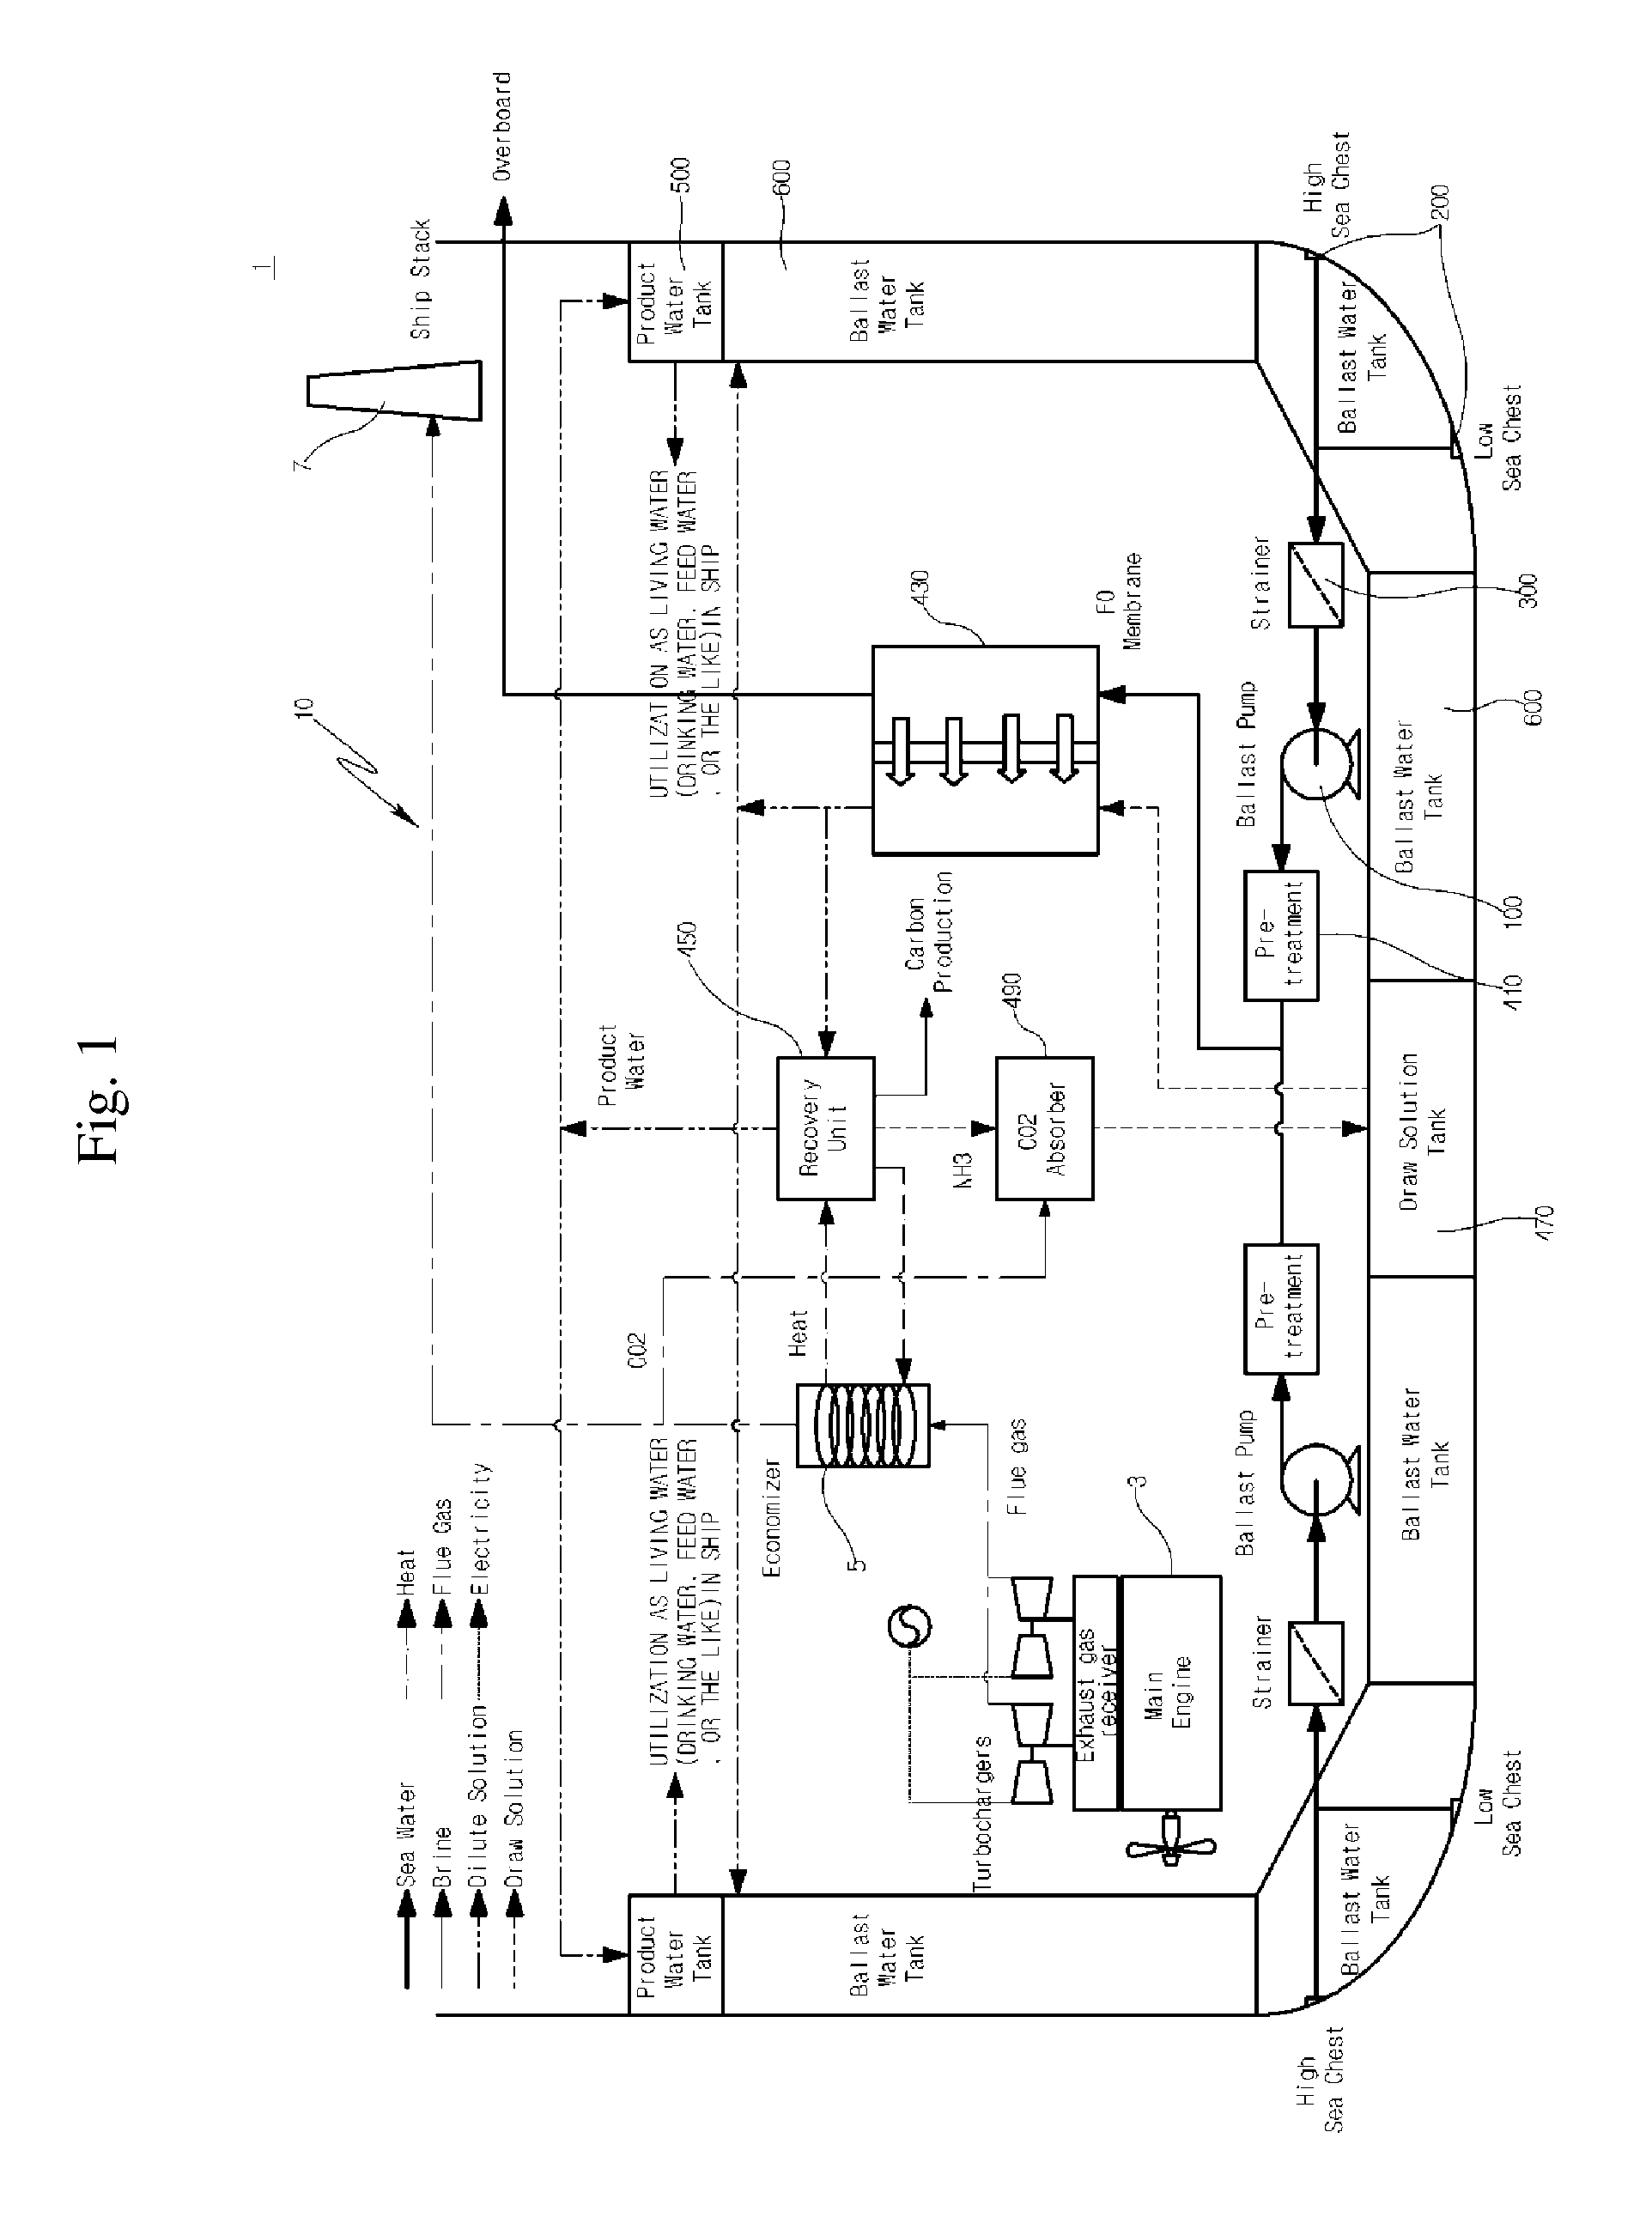 Ballast water treatment apparatus and method for ship using forward osmosis process